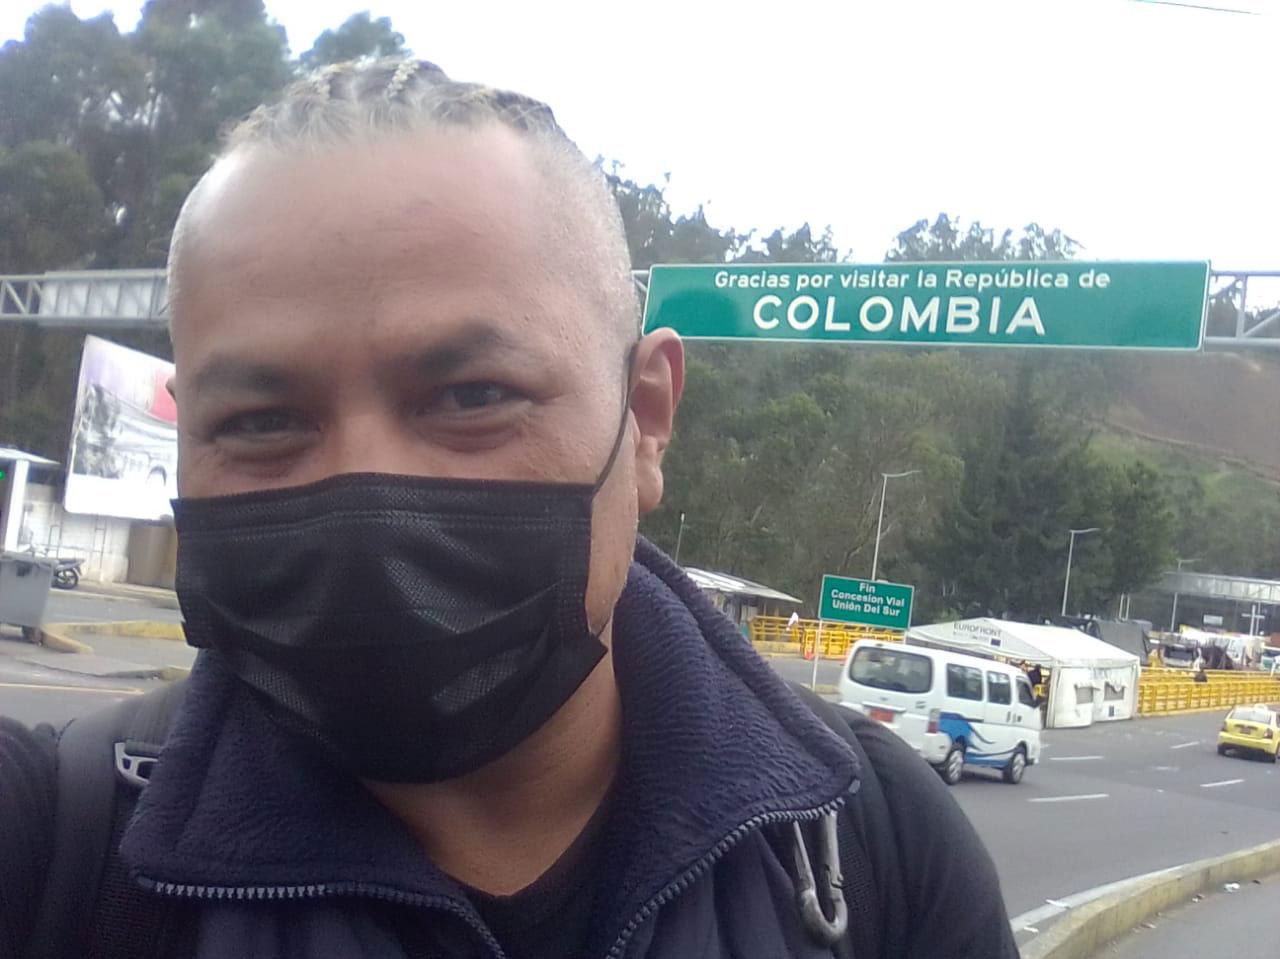 Jose Loya takes a selfie while wearing a black face mask in front of a green sign that reads 